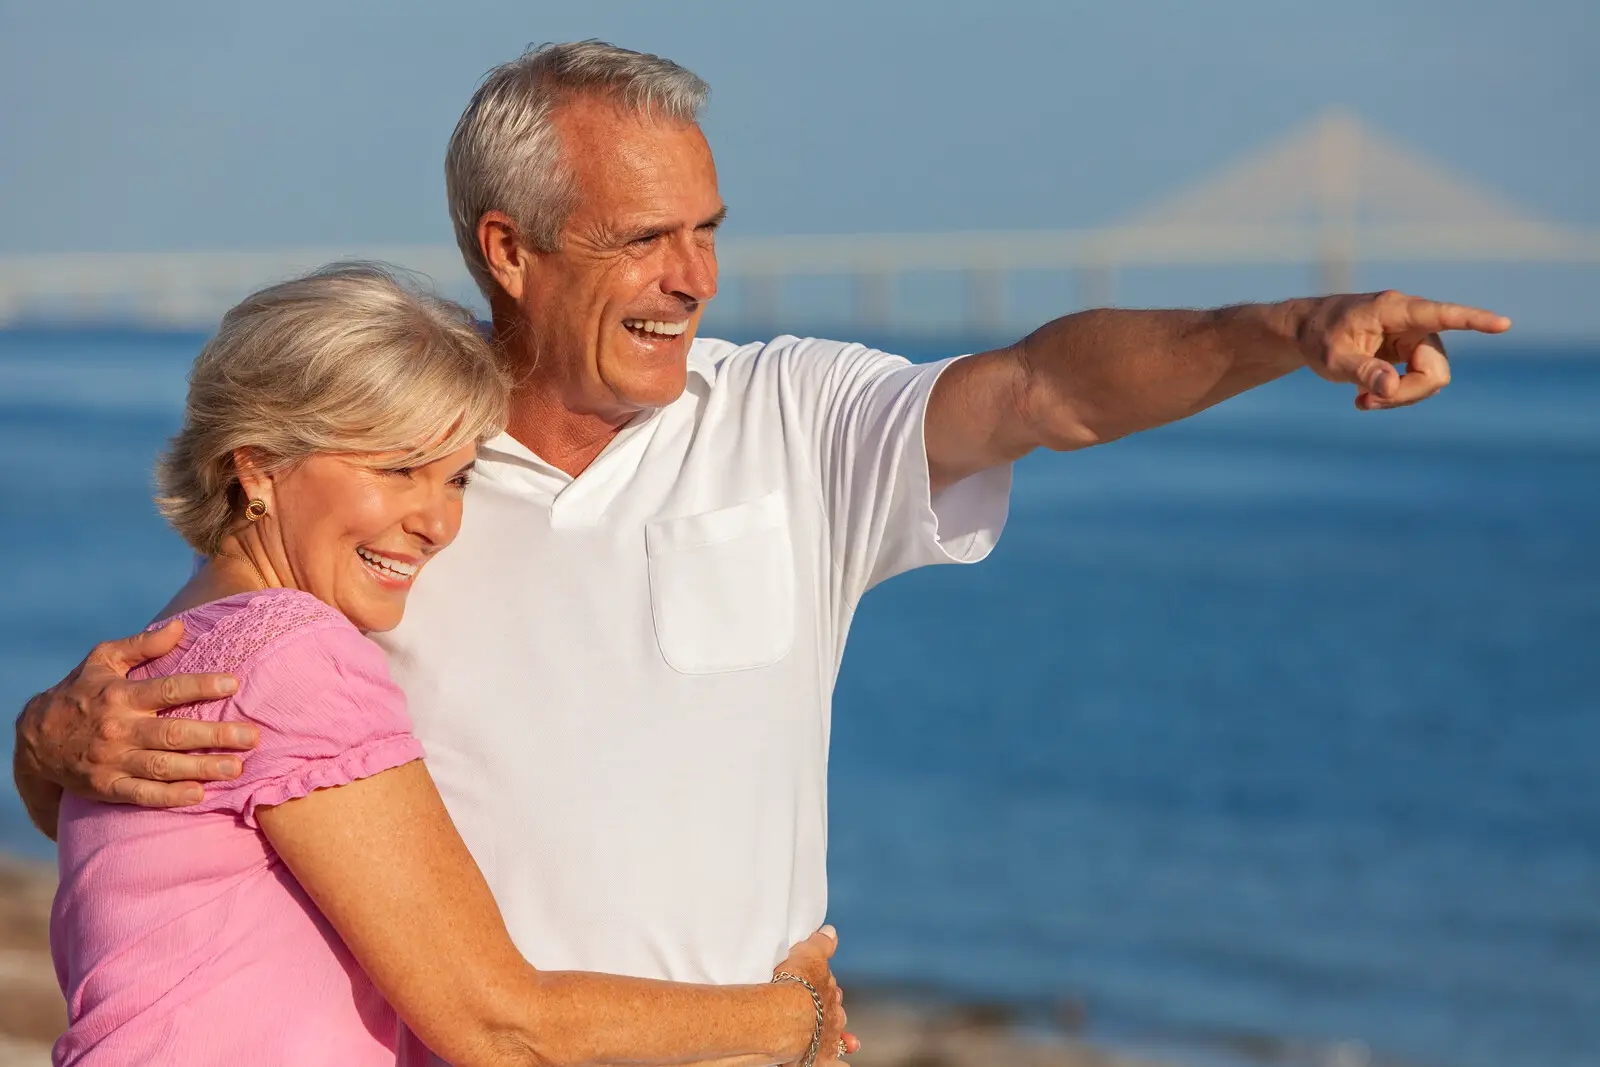 Travel Scams  - A happy smiling senior couple standing on a beach embracing the man is pointing out further along the ocean behind blue skies and a faded bridge in the background. 